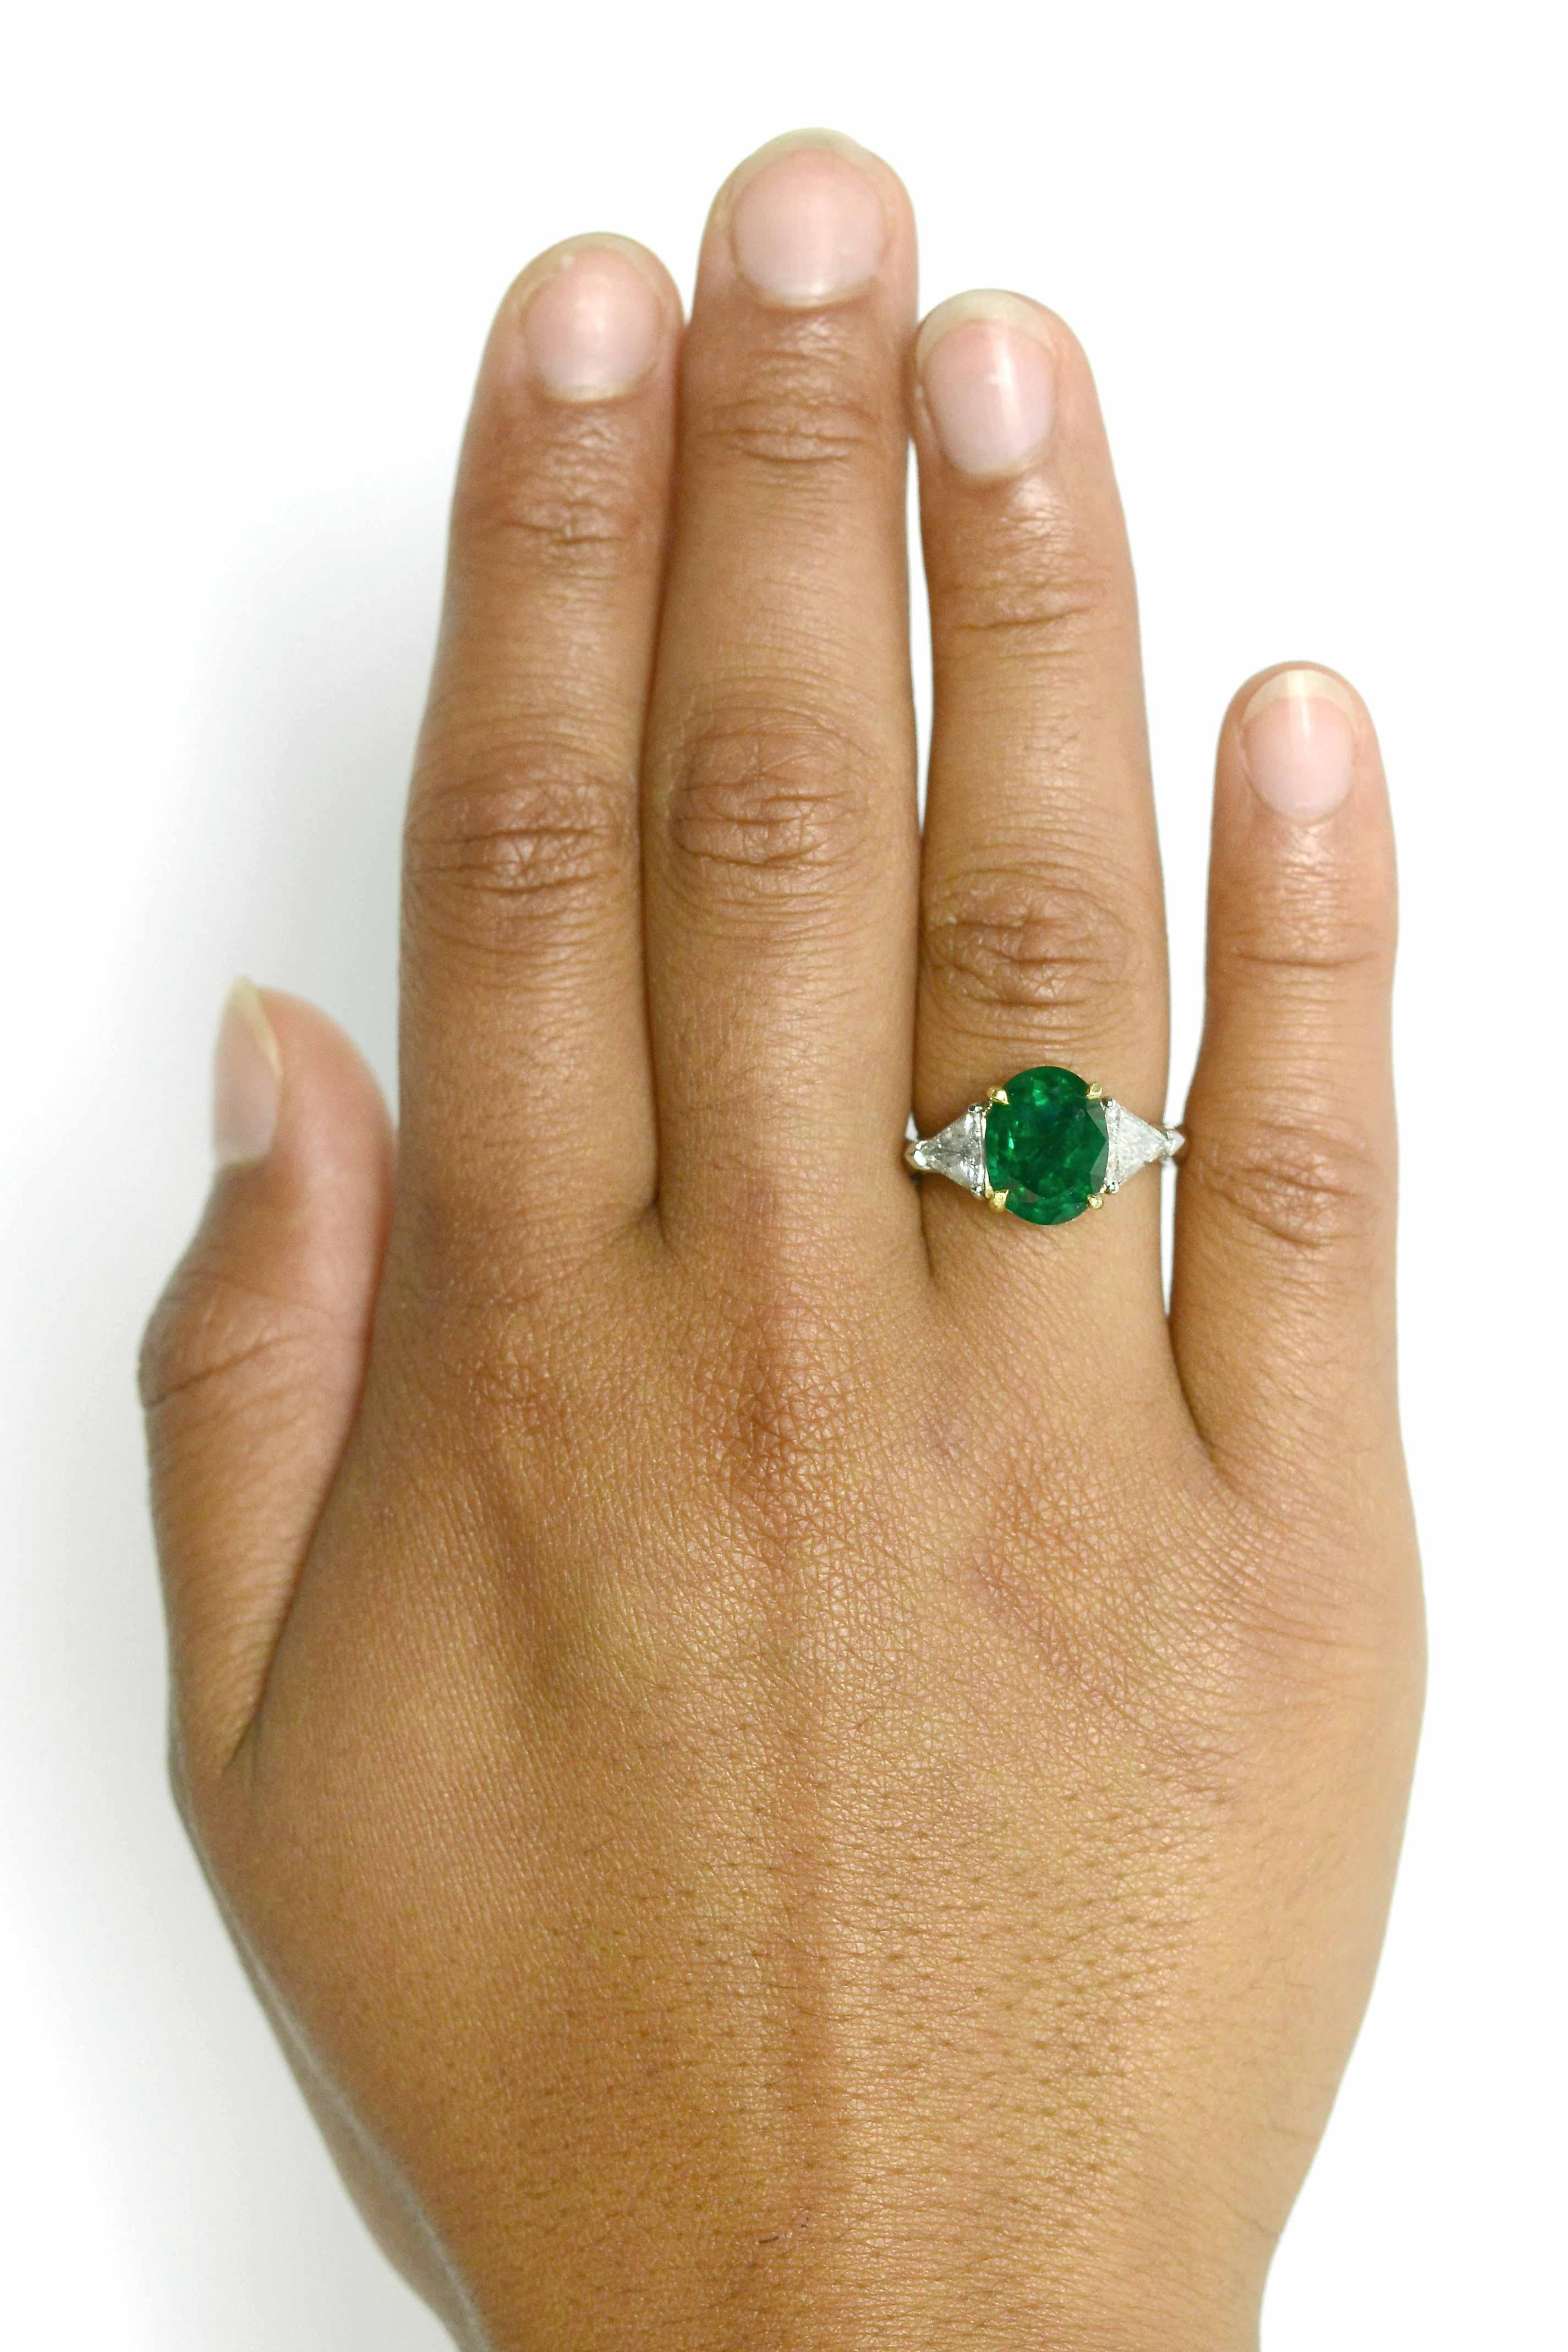 A most elegant emerald engagement ring composed as a classic, timeless 3 stone trinity. Centered by a lustrous, vibrant rich green natural emerald that glows with a fire within it's soul. Weighing 3.74 carats and smartly flanked by a pair of